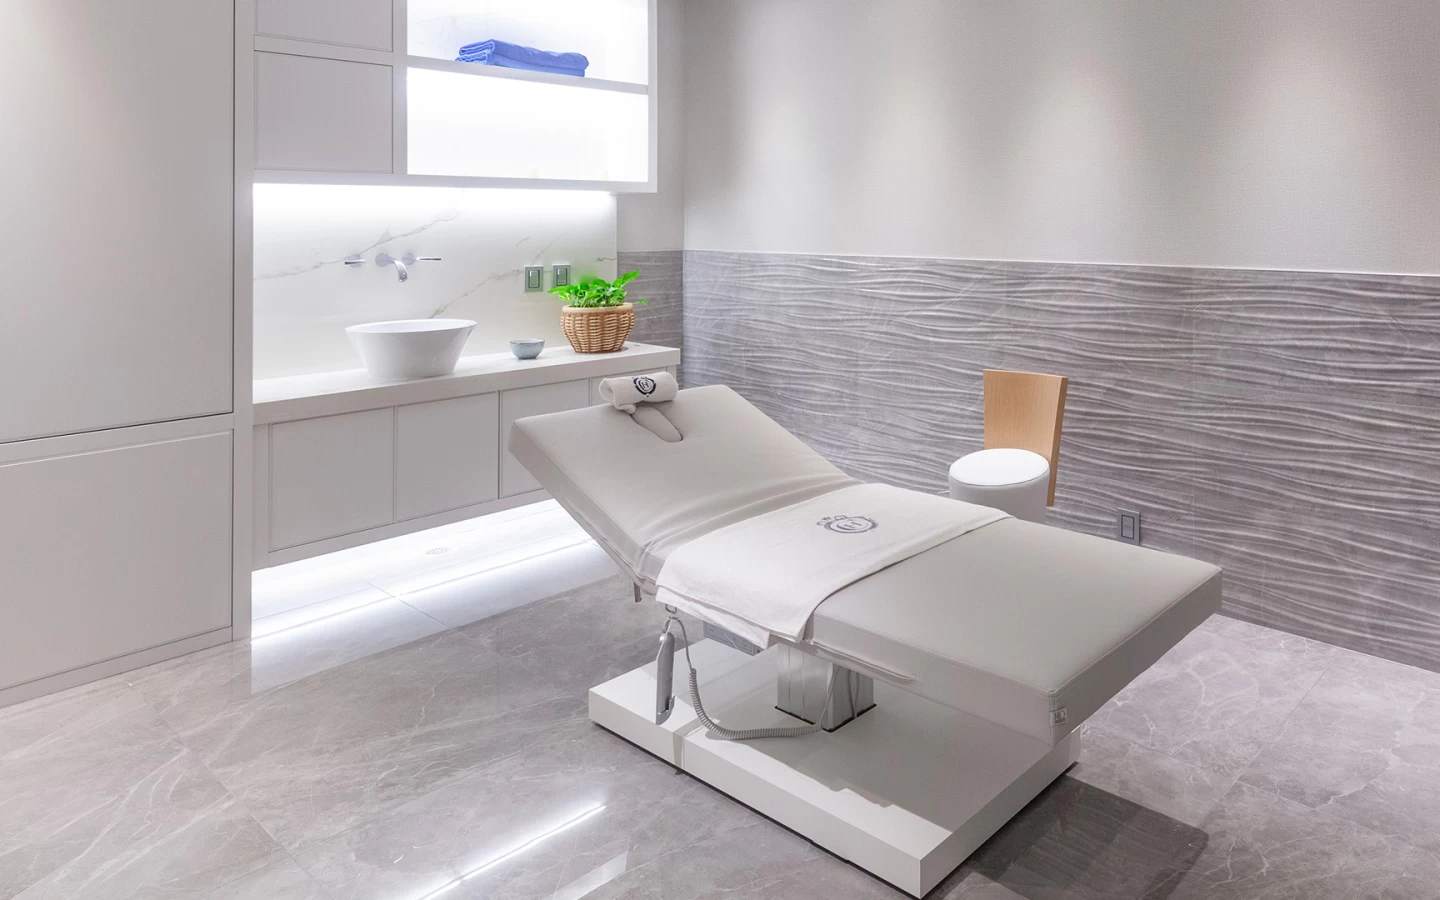 Massage room with walls clad in Atlas Plan marble-effect porcelain stoneware.